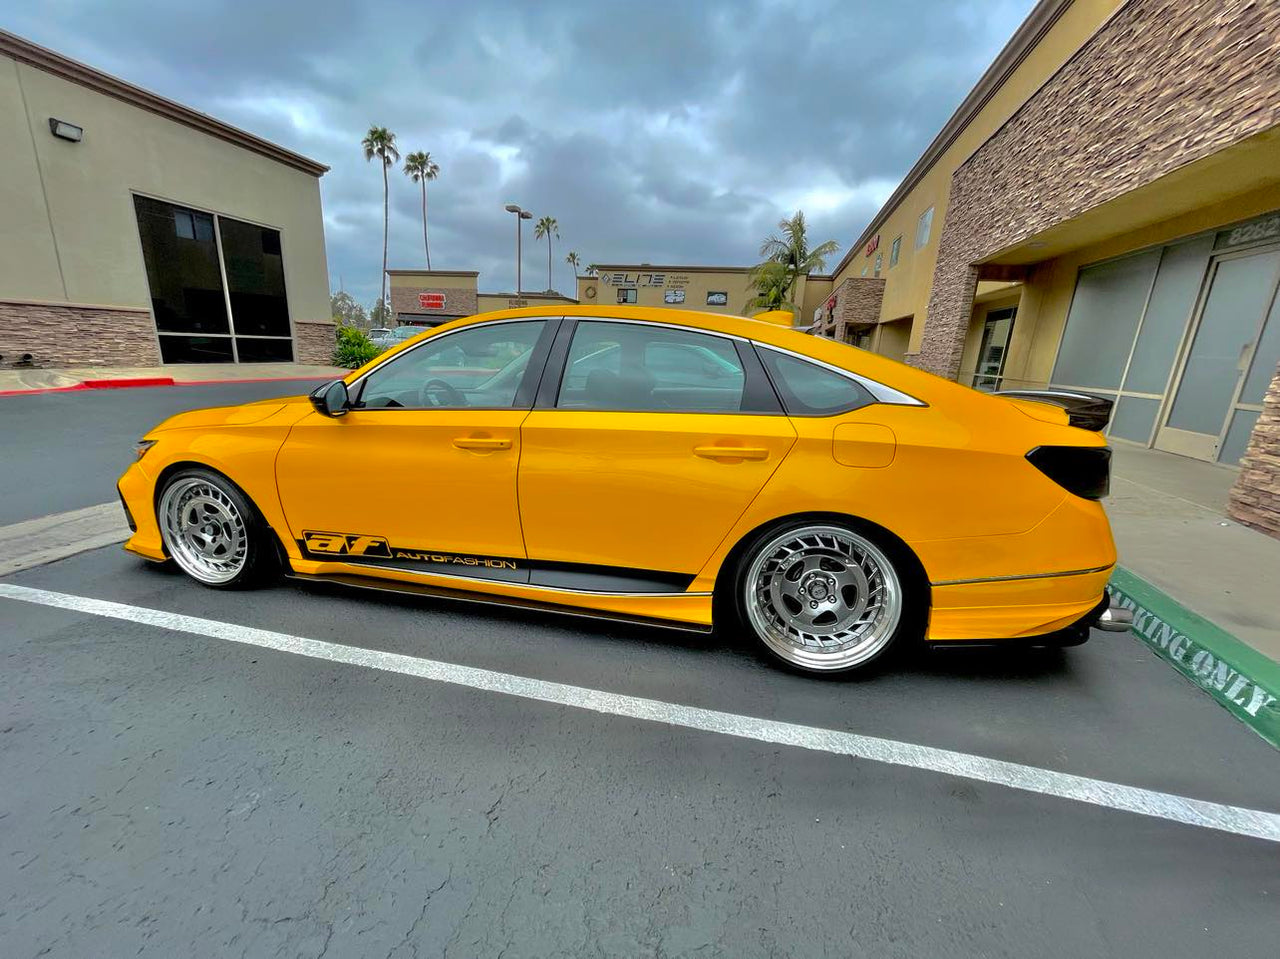 Nothing Mello about this Yellow Accord